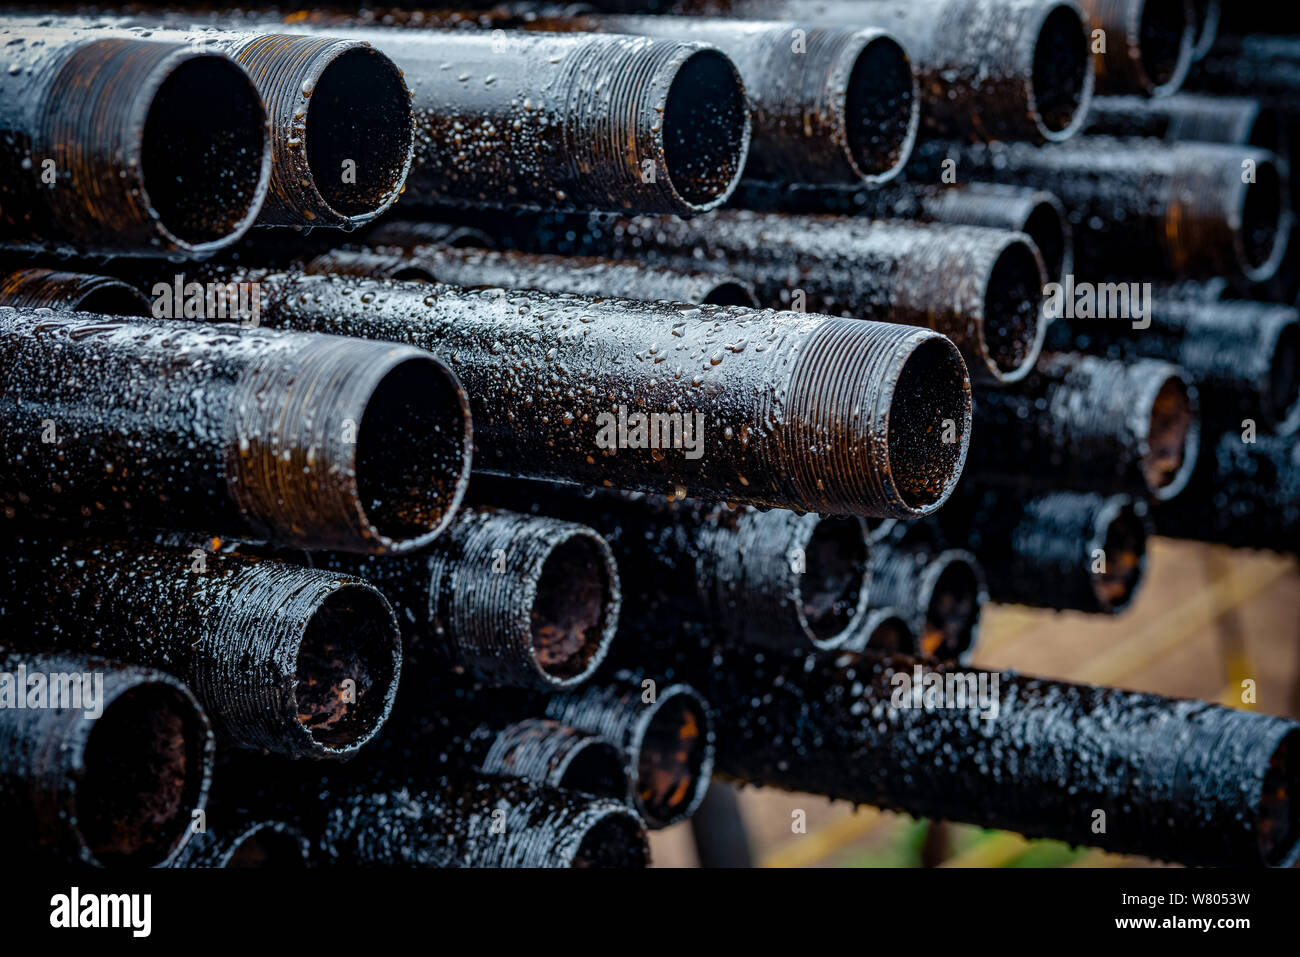 Oil Drill pipe. Rusty drill pipes were drilled in the well section. Downhole drilling rig. Laying the pipe on the deck. View of the shell of drill pip Stock Photo